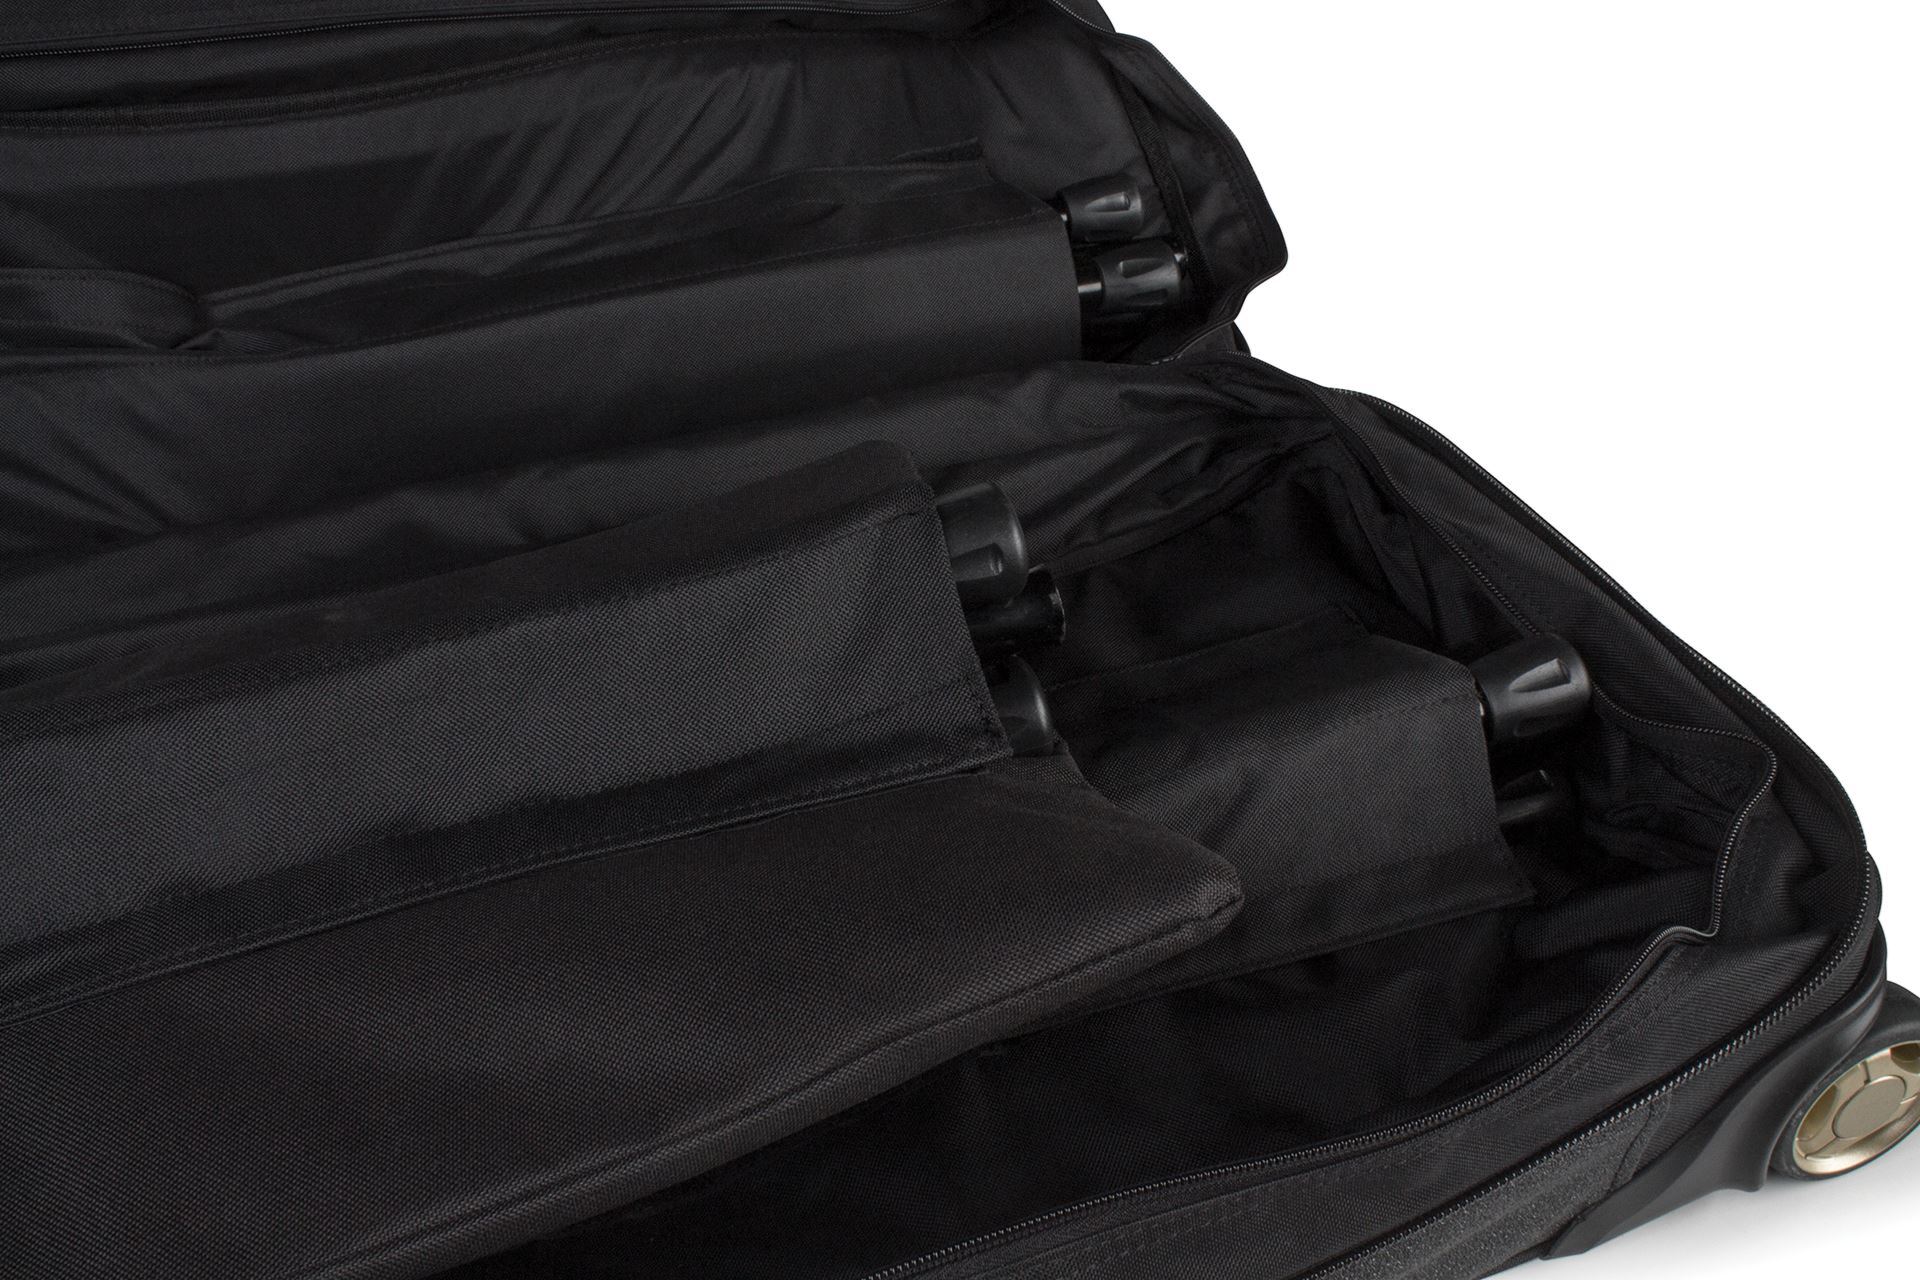 Carrying Bag for 6 Platinum Design Series Mic Stands | AtlasIED